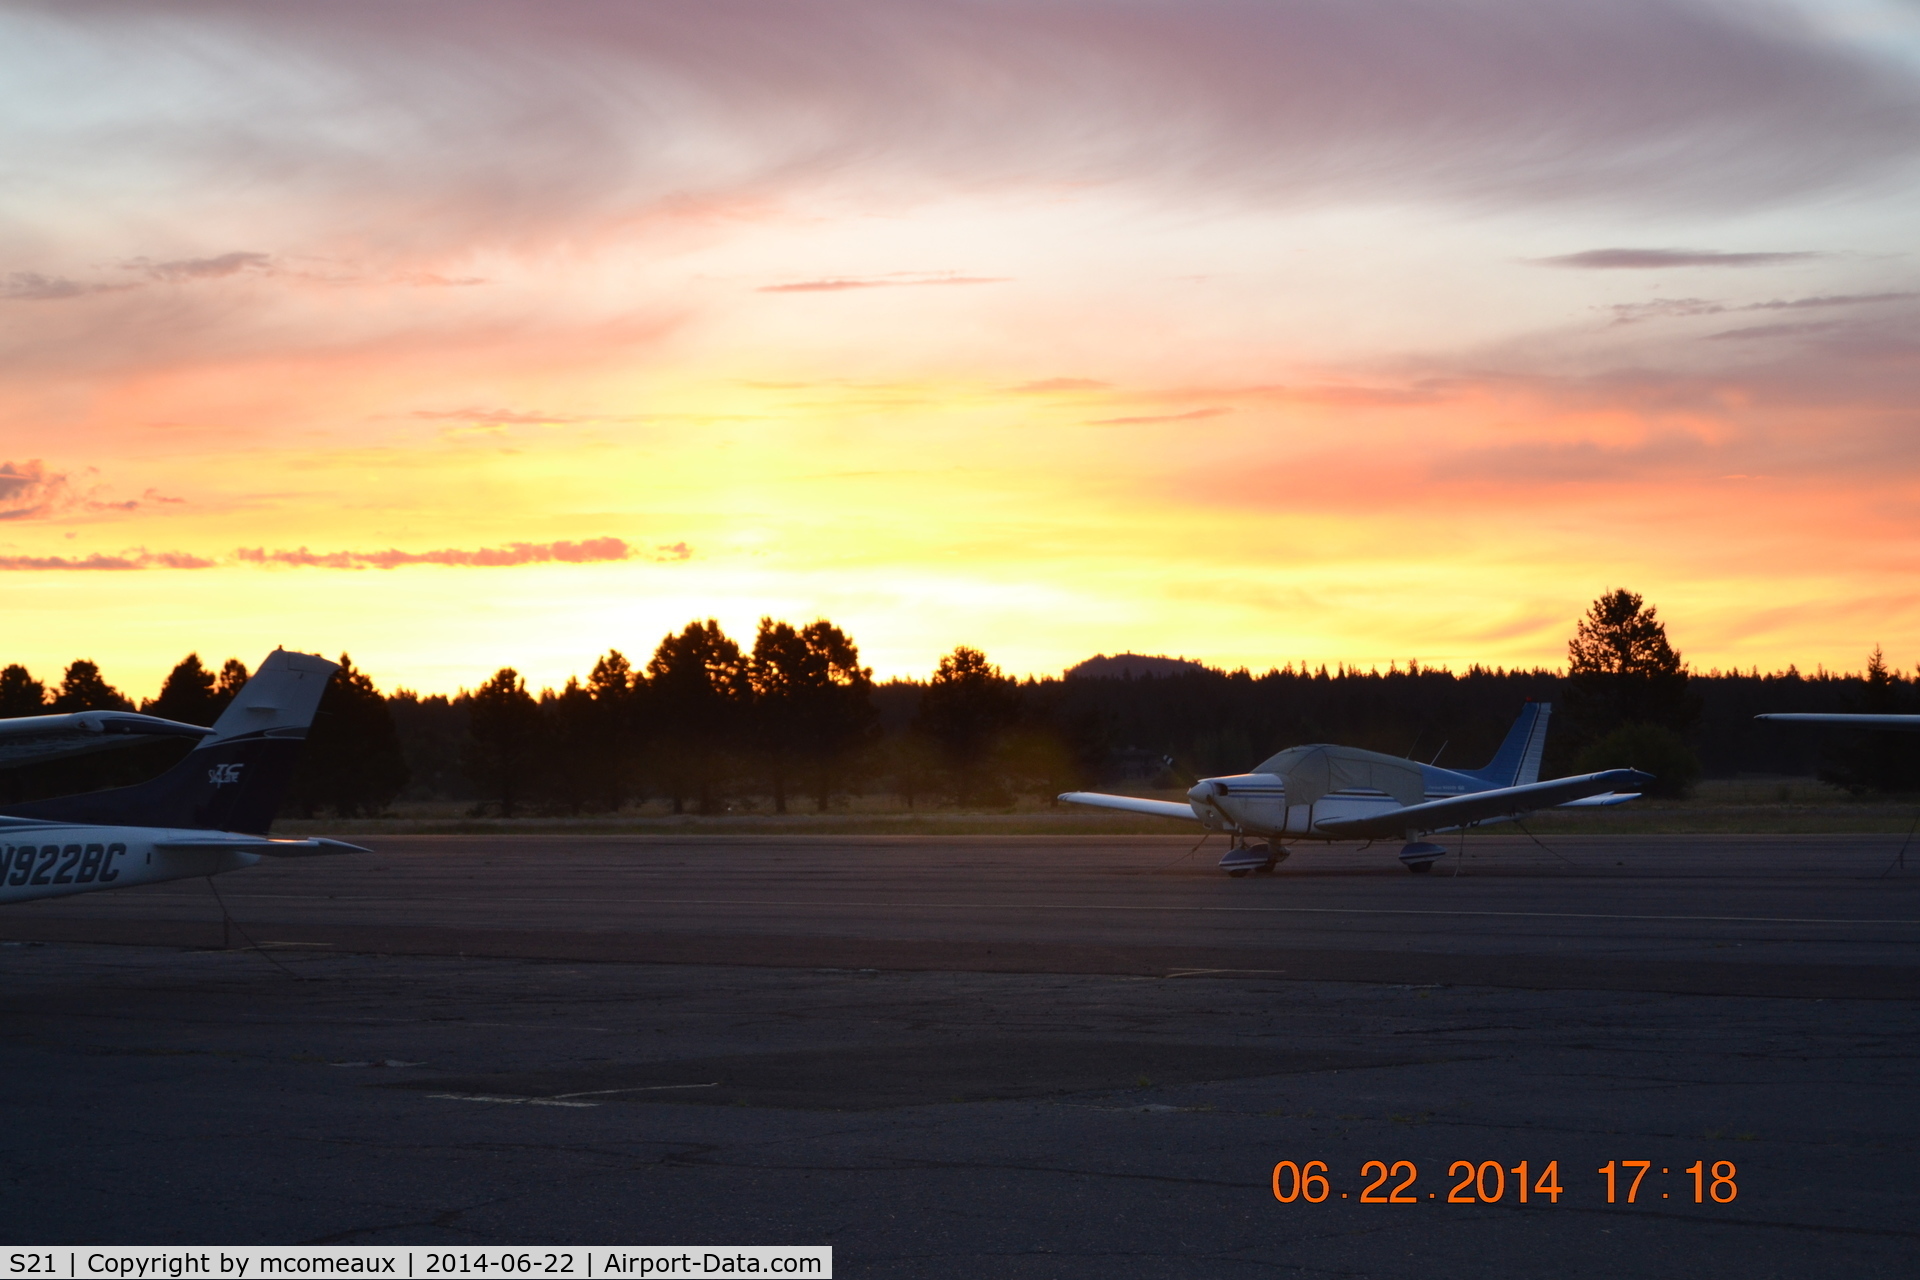 Sunriver Airport (S21) - A.M. Flight out of Sunriver